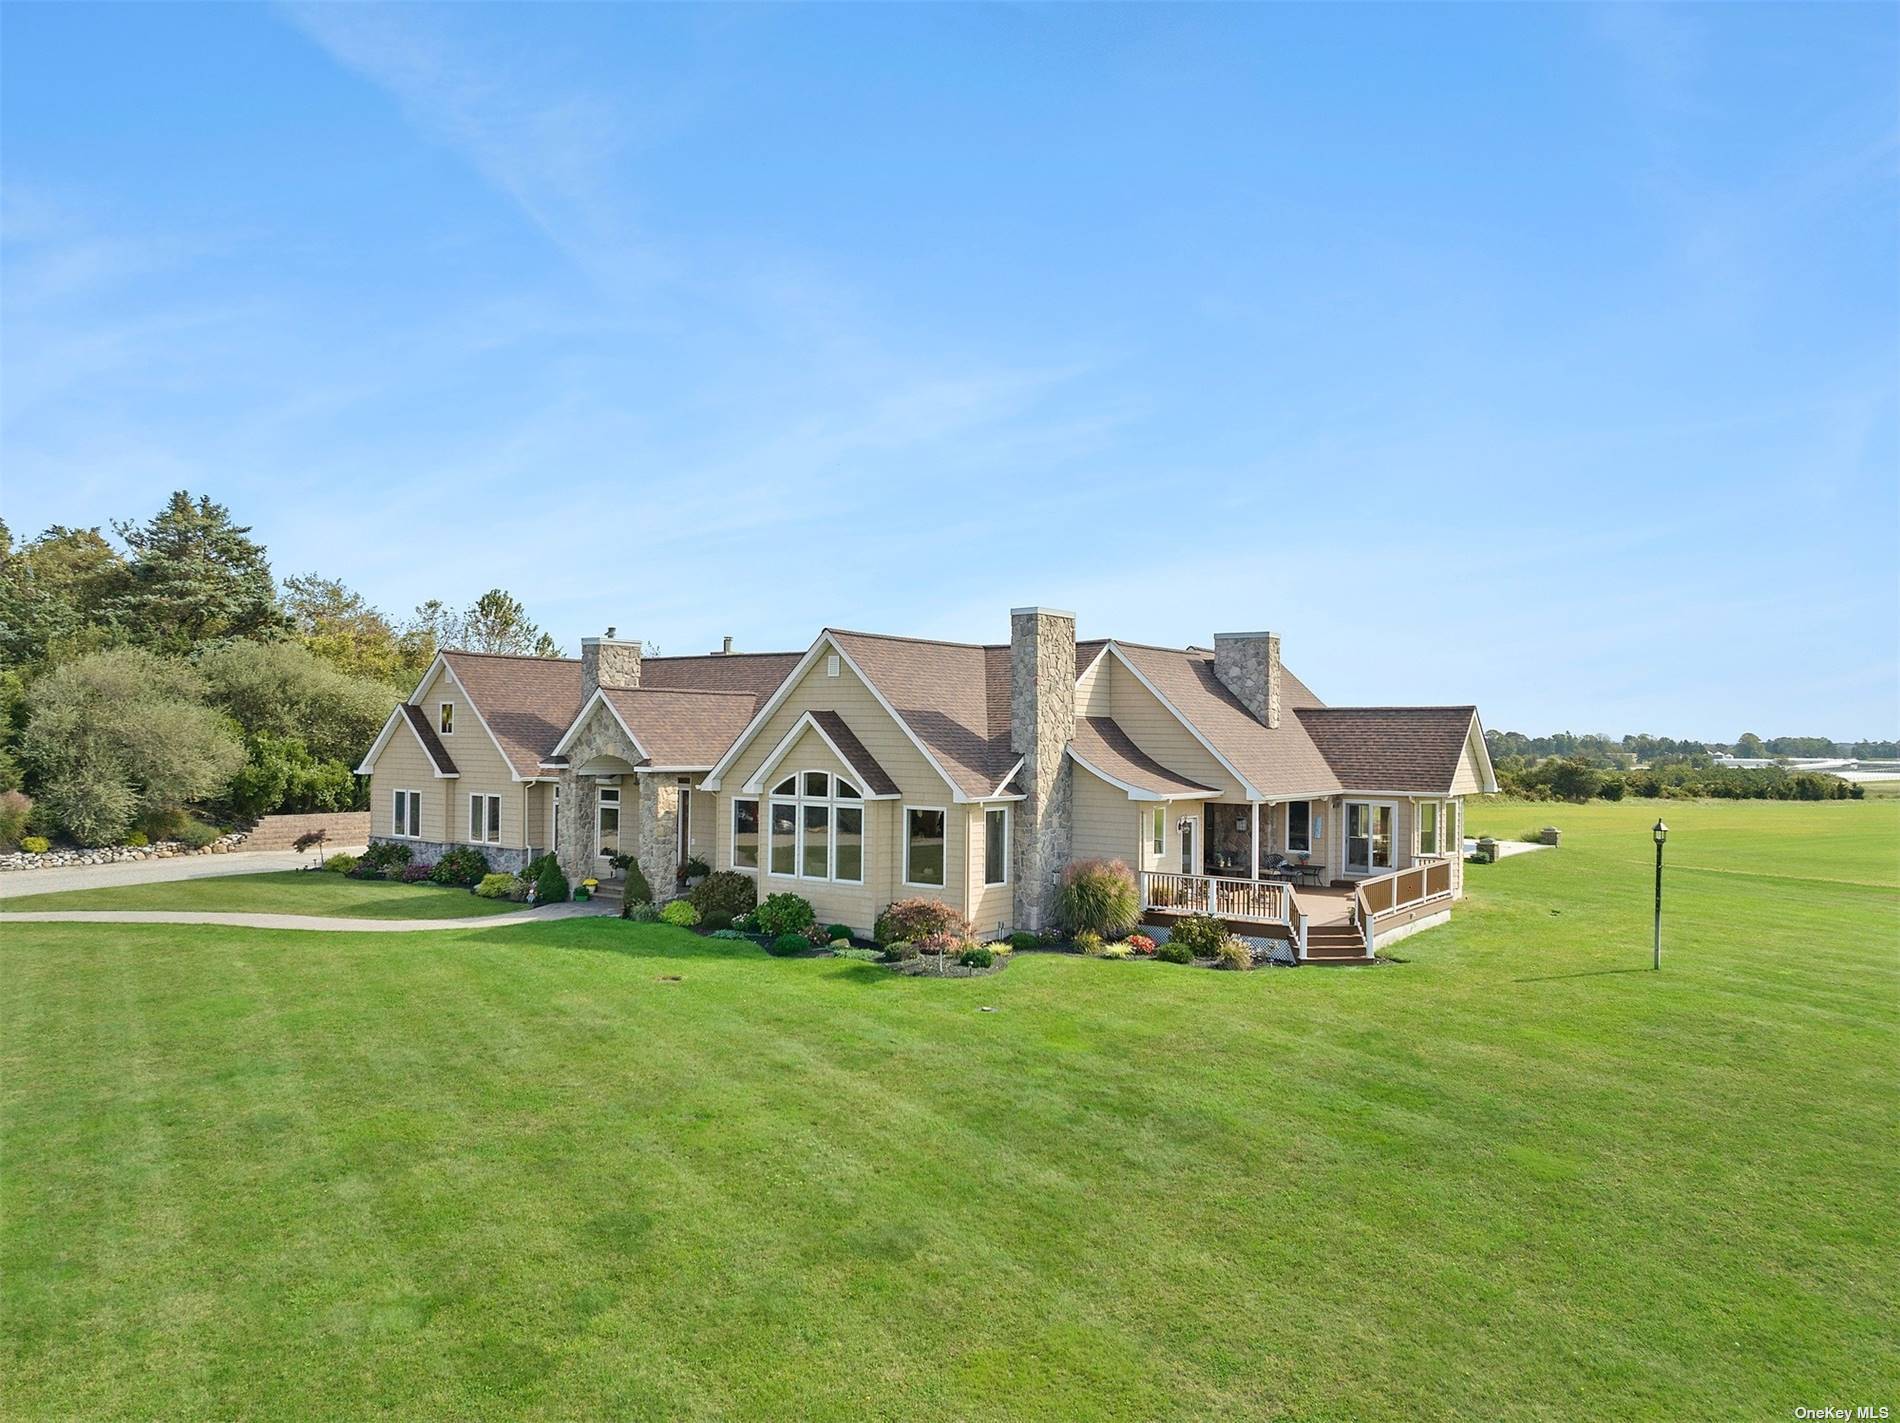 A long winding driveway rises to this spectacular 56 acre property and custom built five bedroom home.